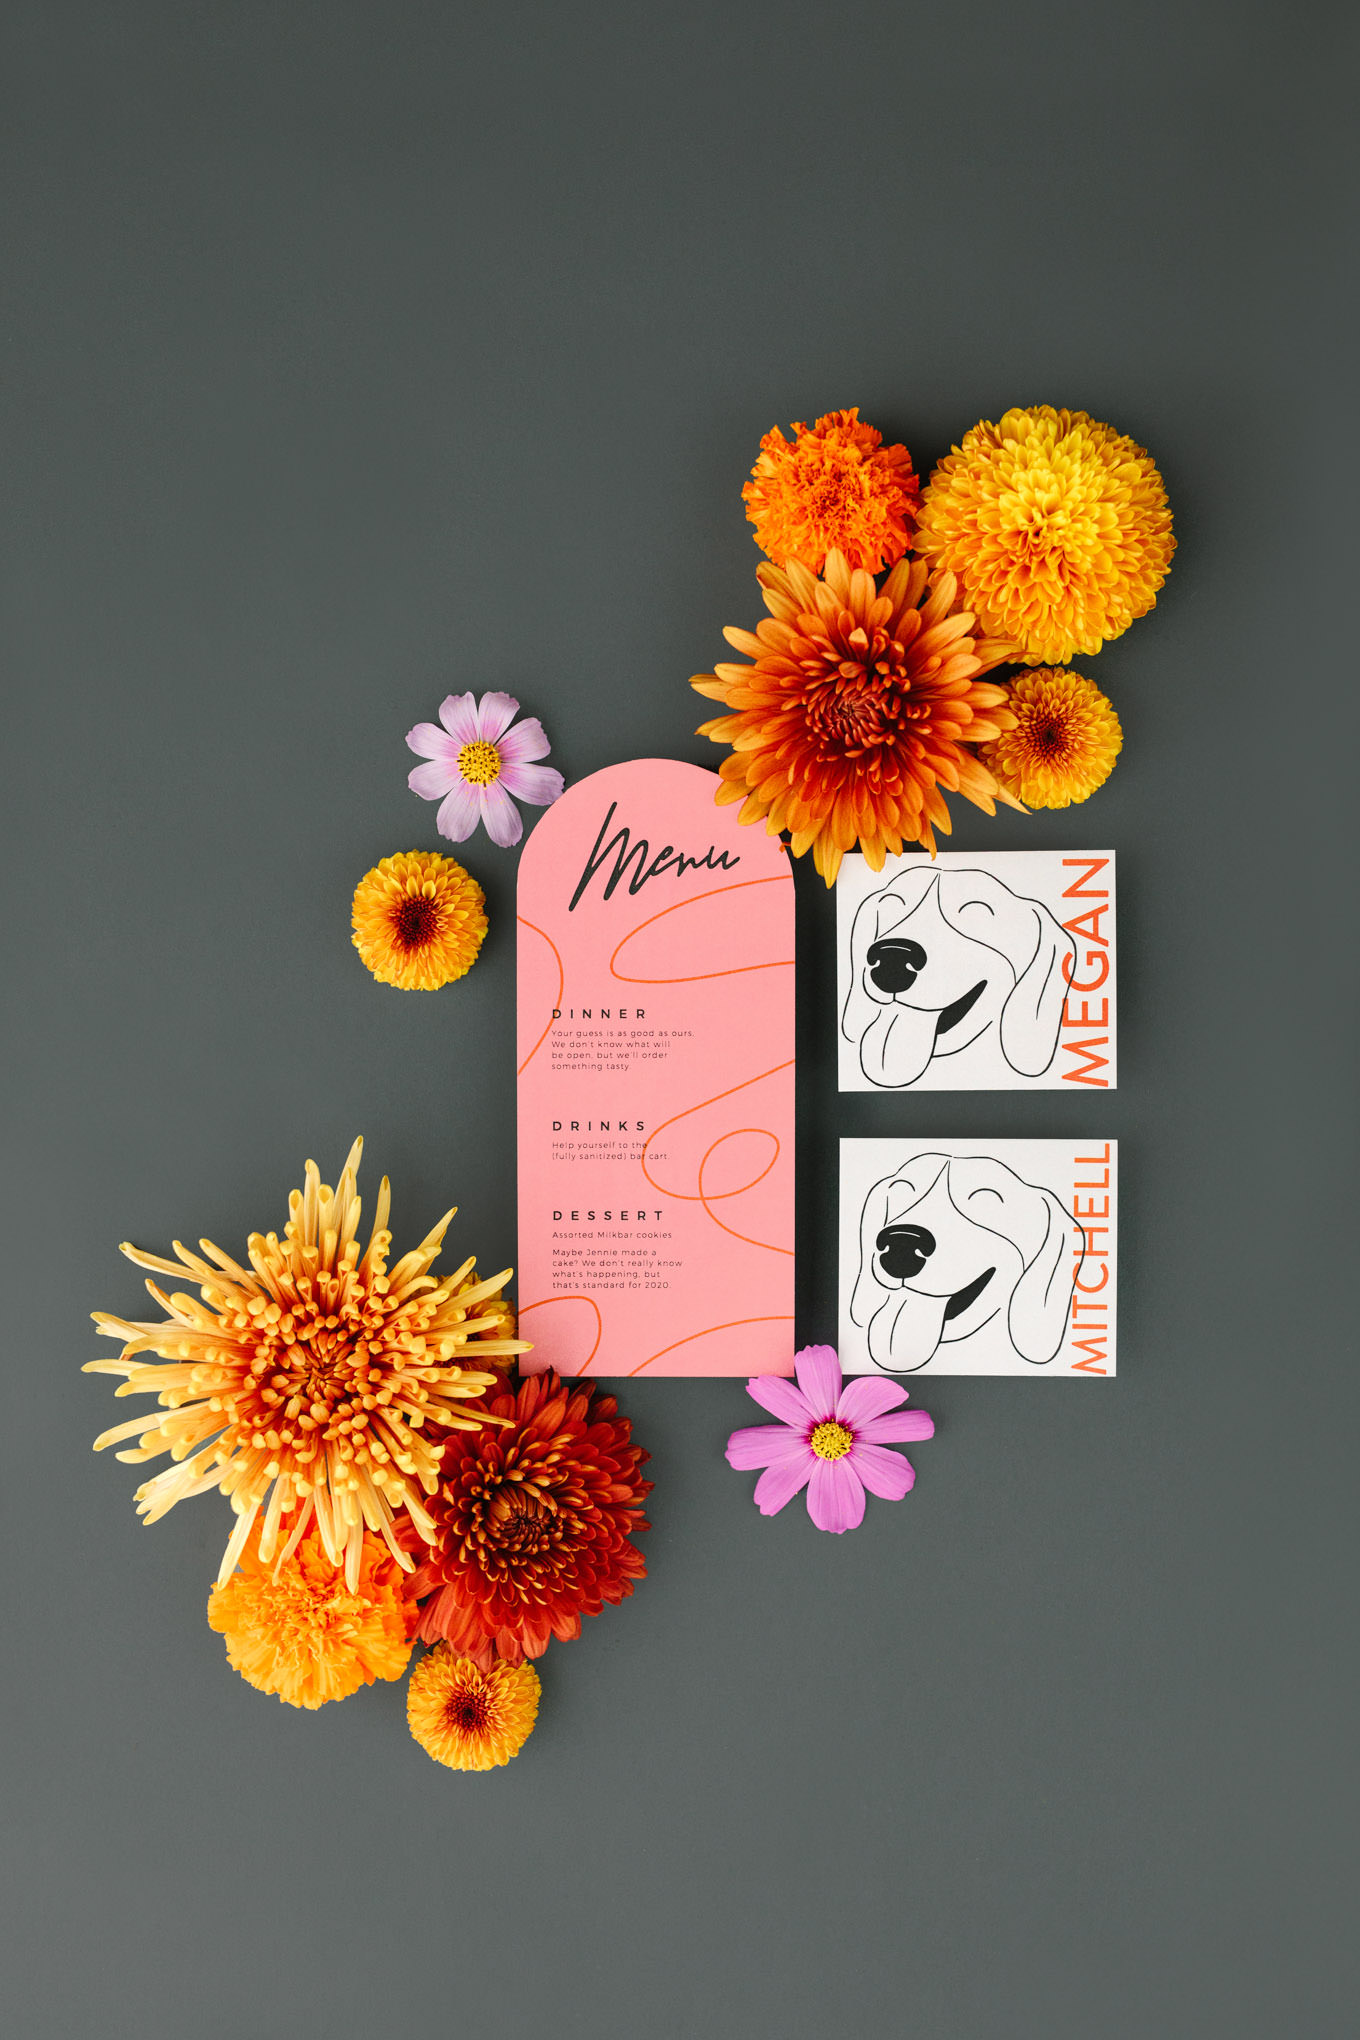 Bold colored menu and place cards for wedding reception | Vibrant backyard micro wedding featured on Green Wedding Shoes | Colorful LA wedding photography | #losangeleswedding #backyardwedding #microwedding #laweddingphotographer Source: Mary Costa Photography | Los Angeles